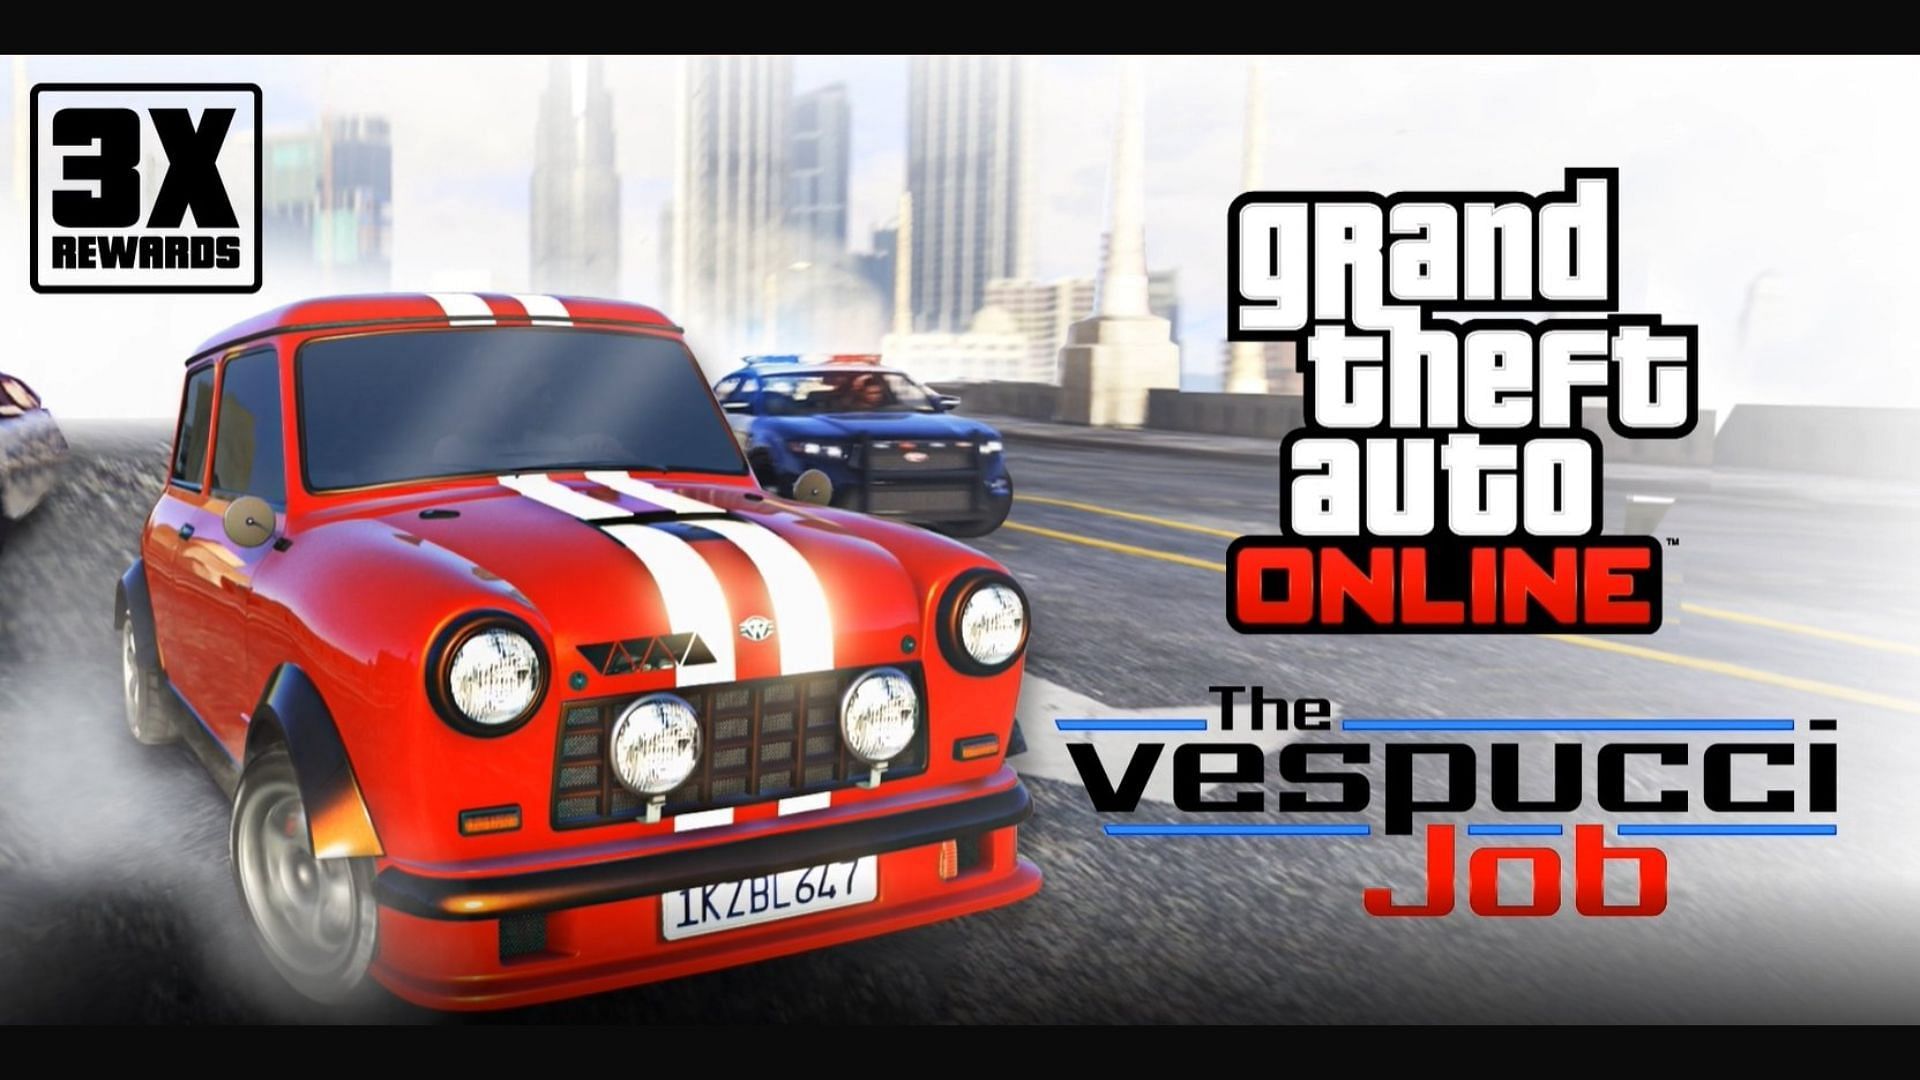 The Vespucci Job (Remix) is giving 3x bonuses in GTA Online with the new weekly update (Image via Rockstar Games)